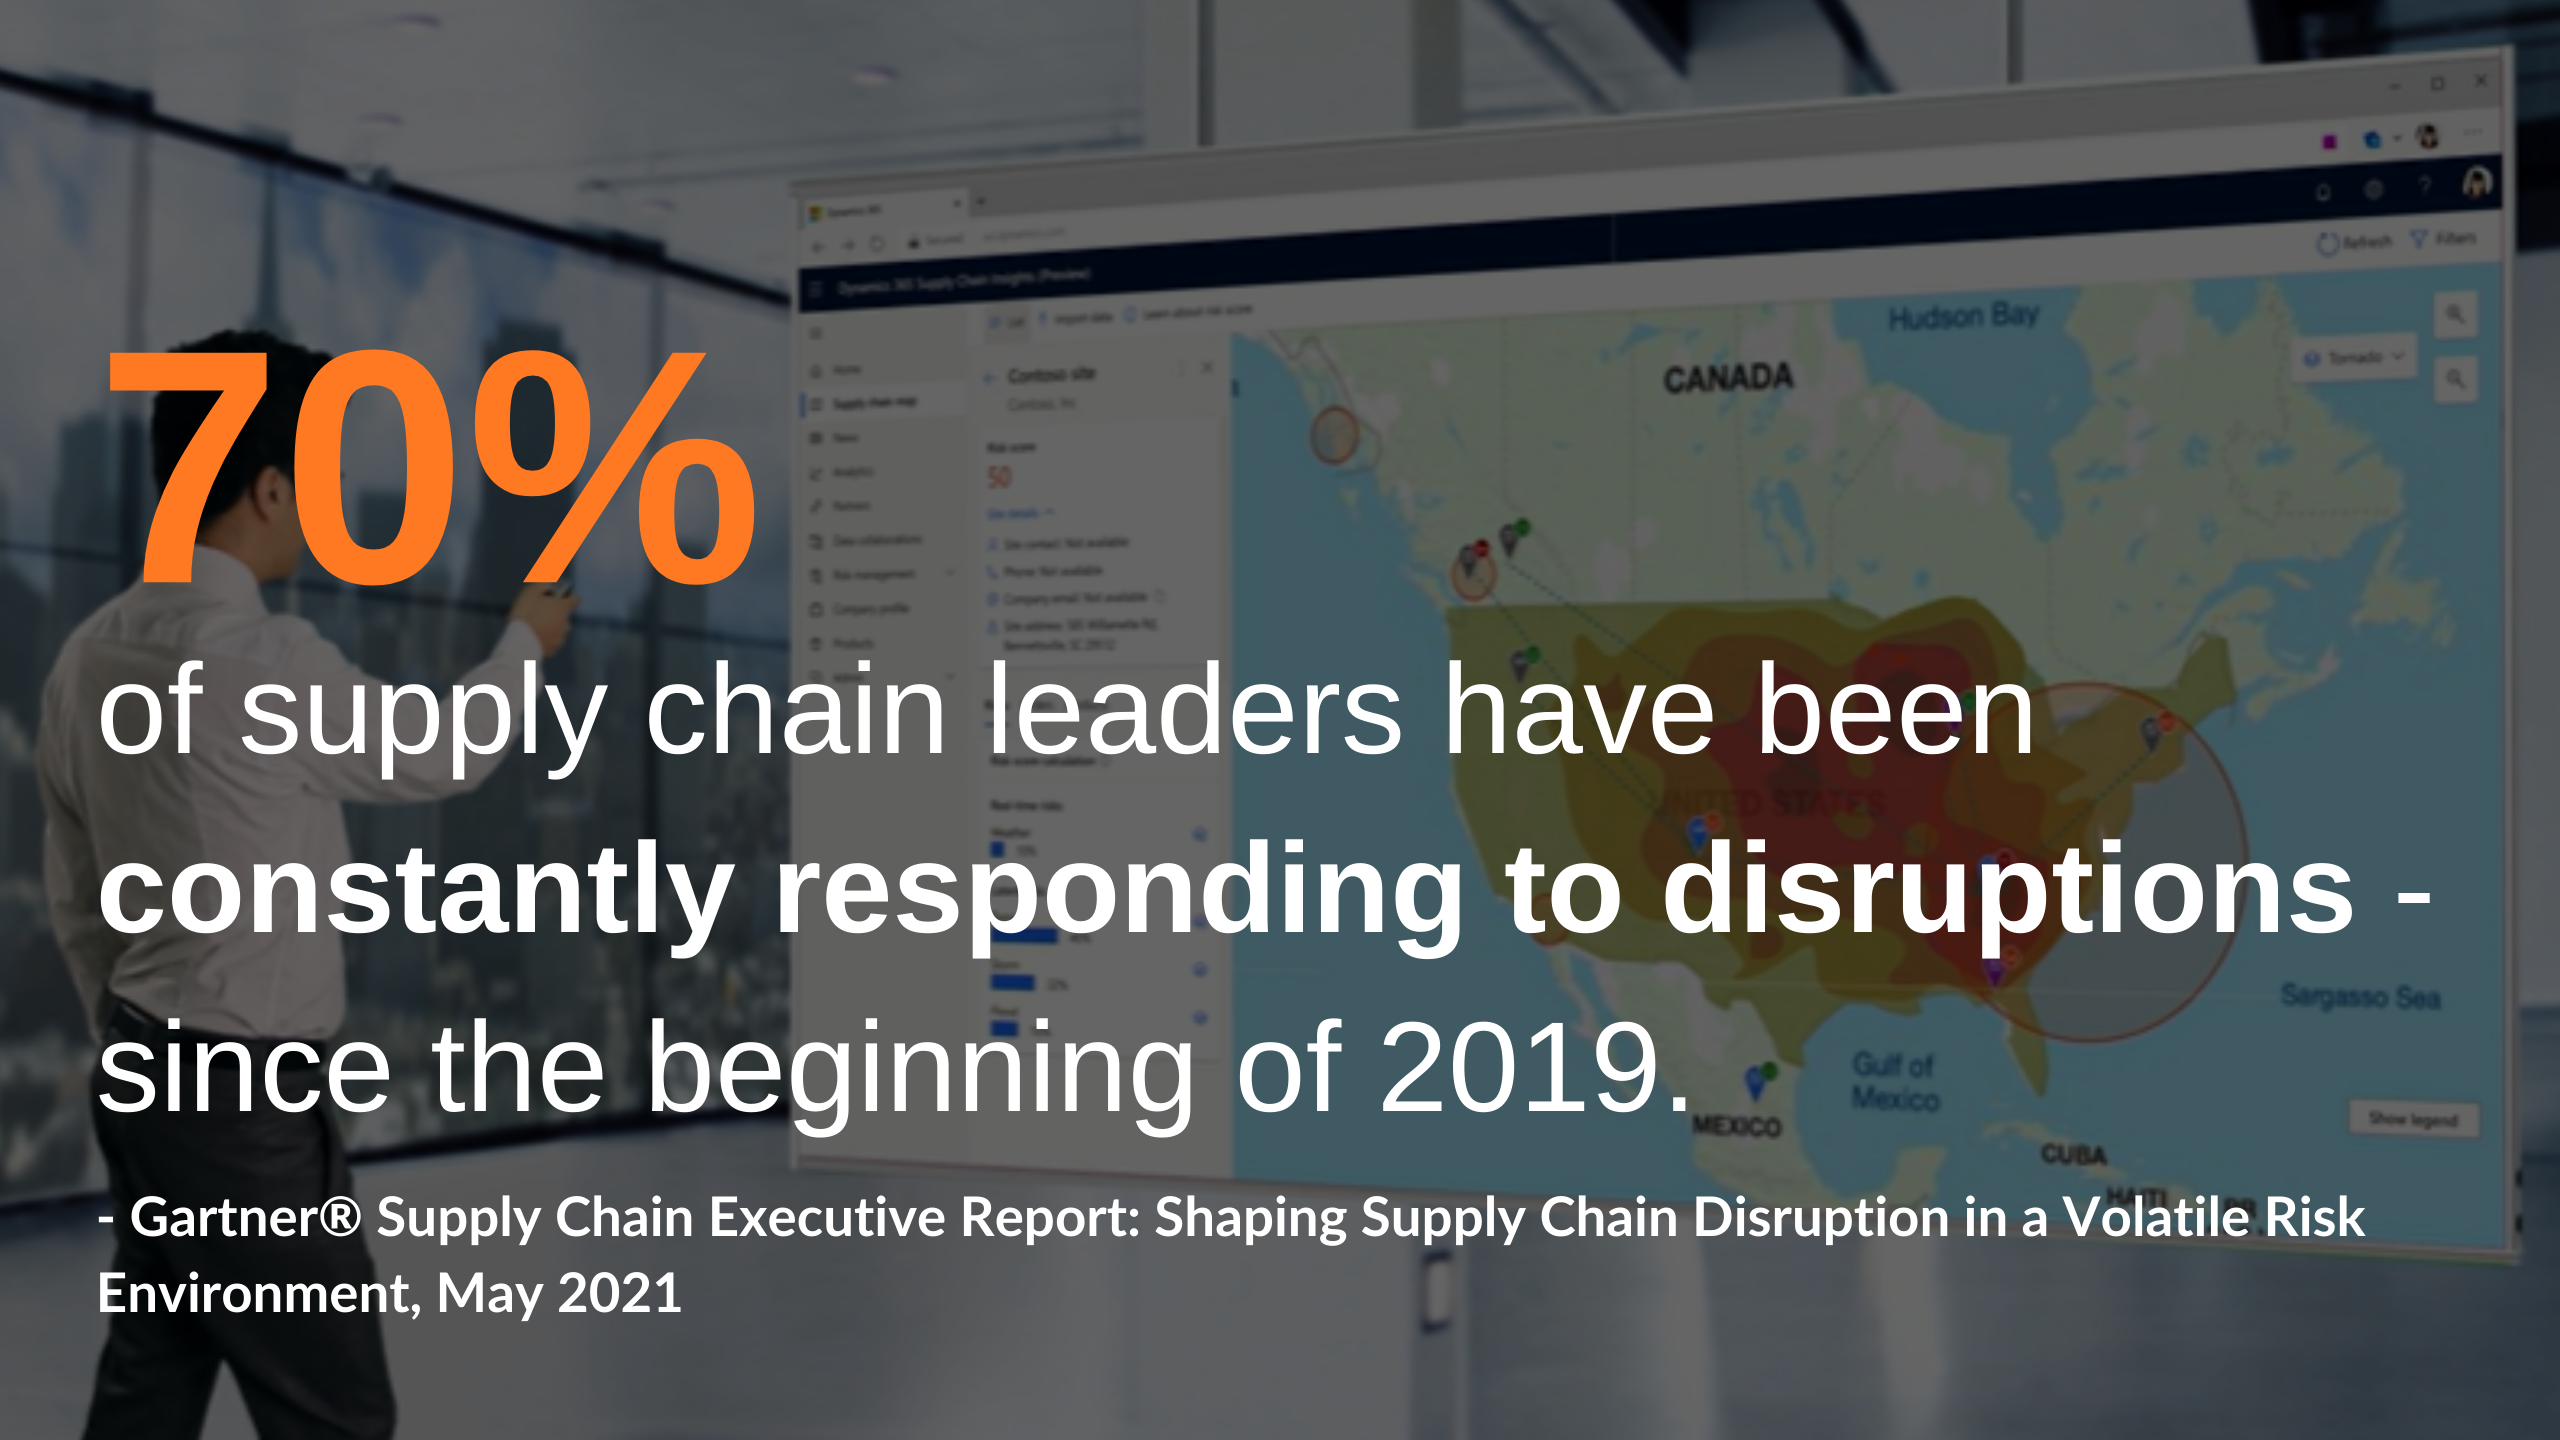 Since the beginning of 2019, nearly 70 percent of supply chain leaders have been constantly responding to disruptions